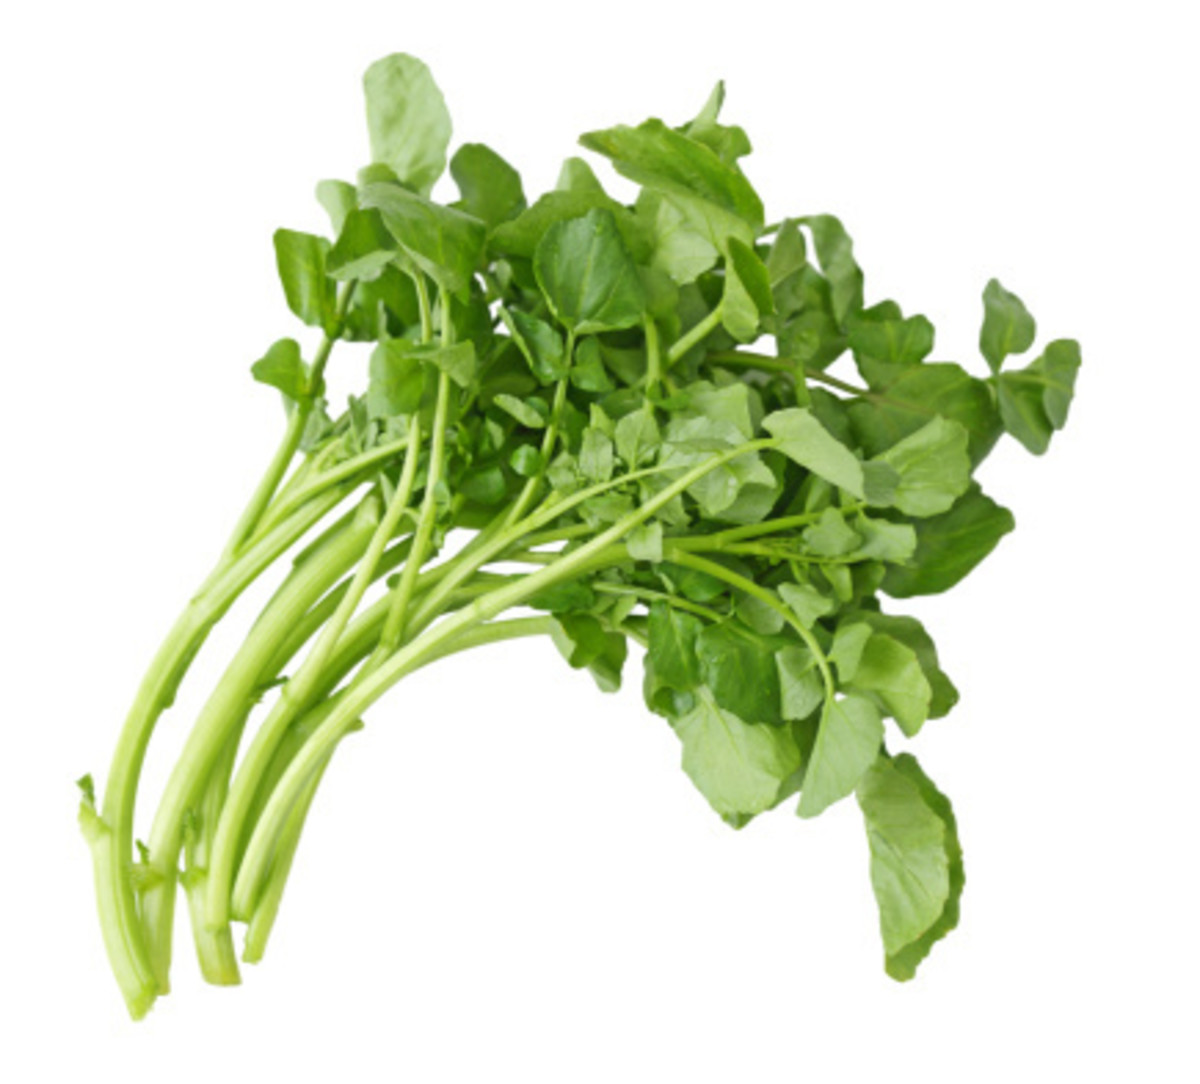 get-even-more-greener-by-eating-the-last-four-leafy-green-vegetables-in-your-meals